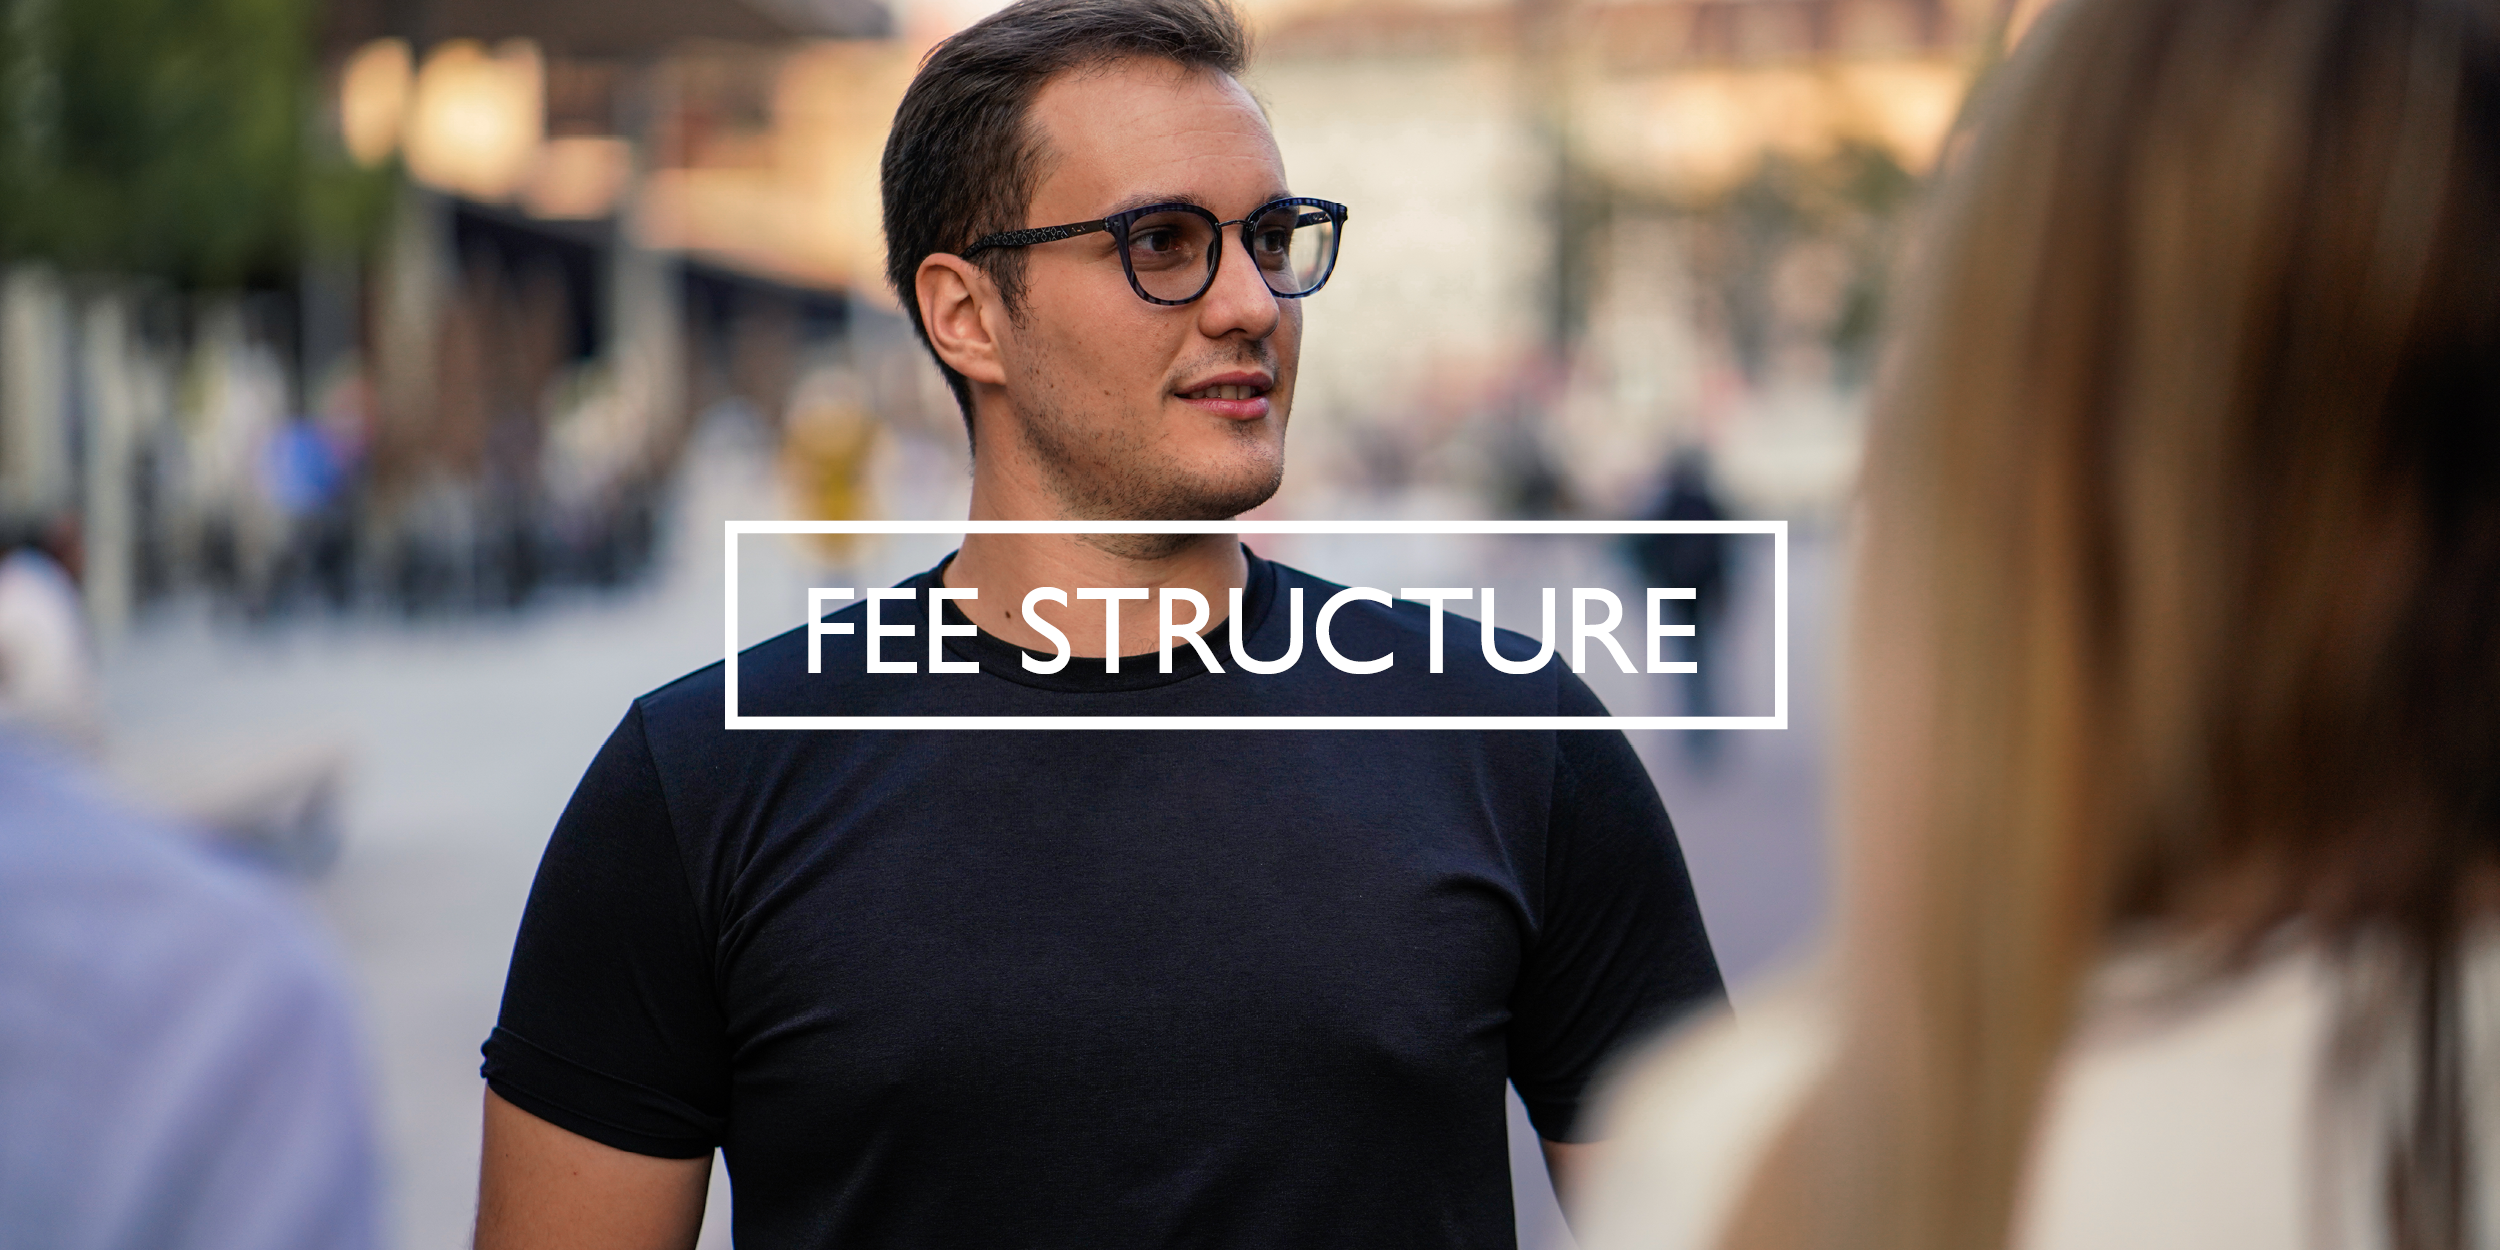 Fee Structure button